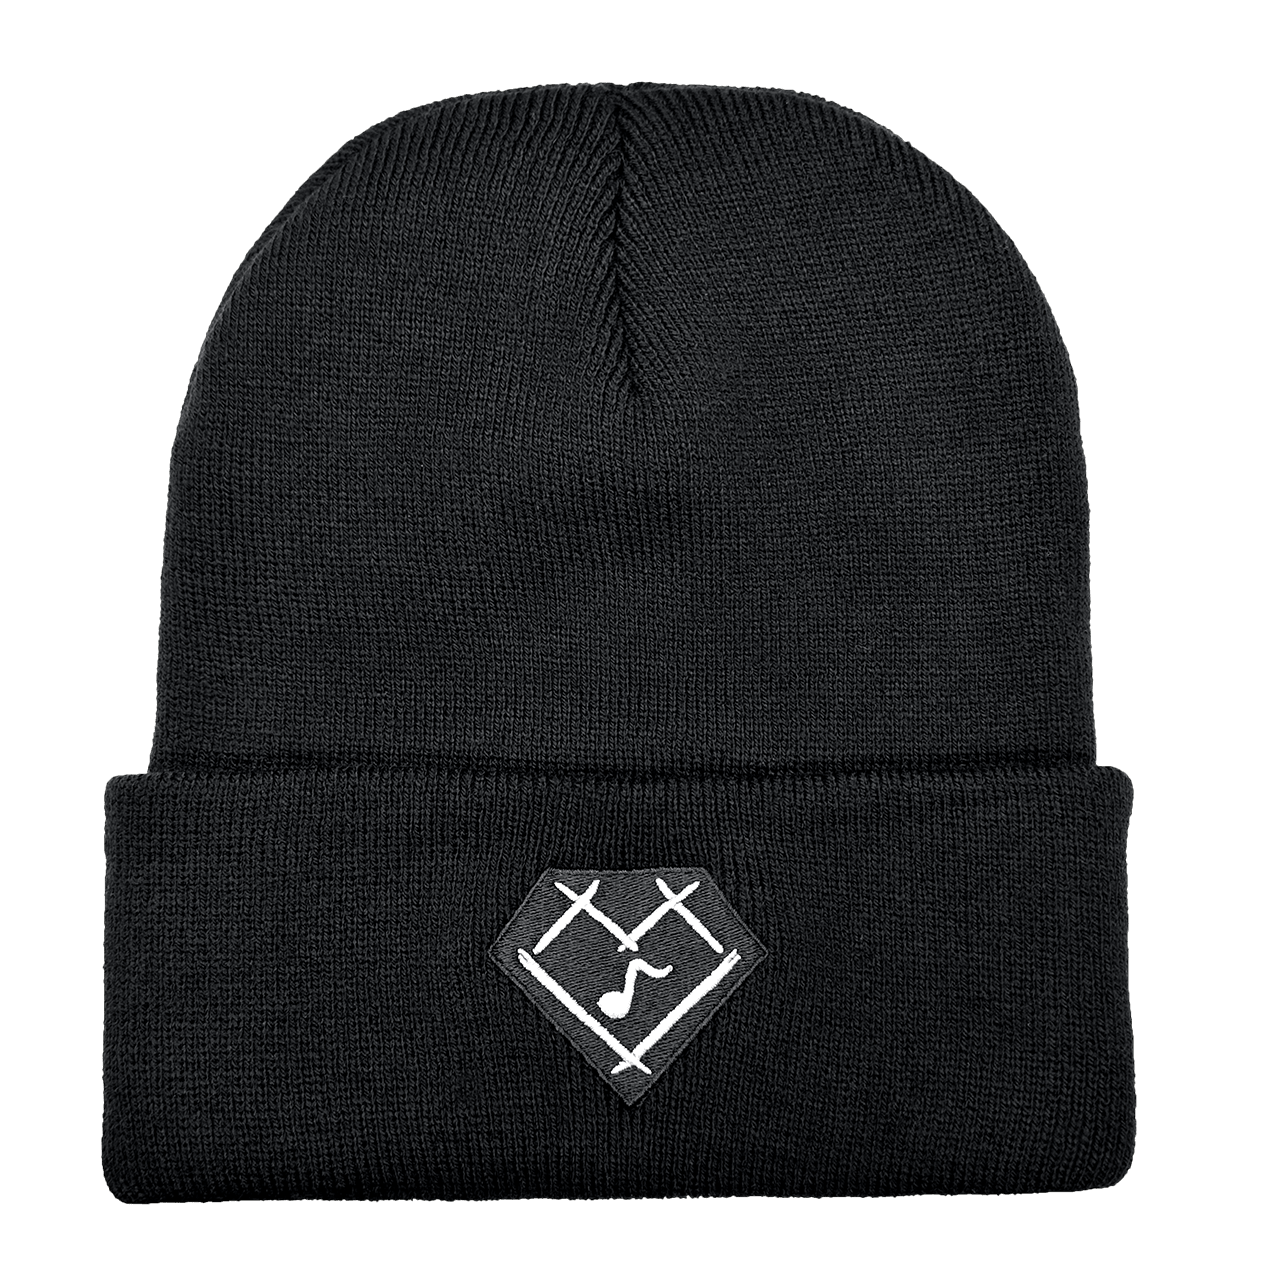 October MEMBERS ONLY Musical Heart Cuffed Beanie